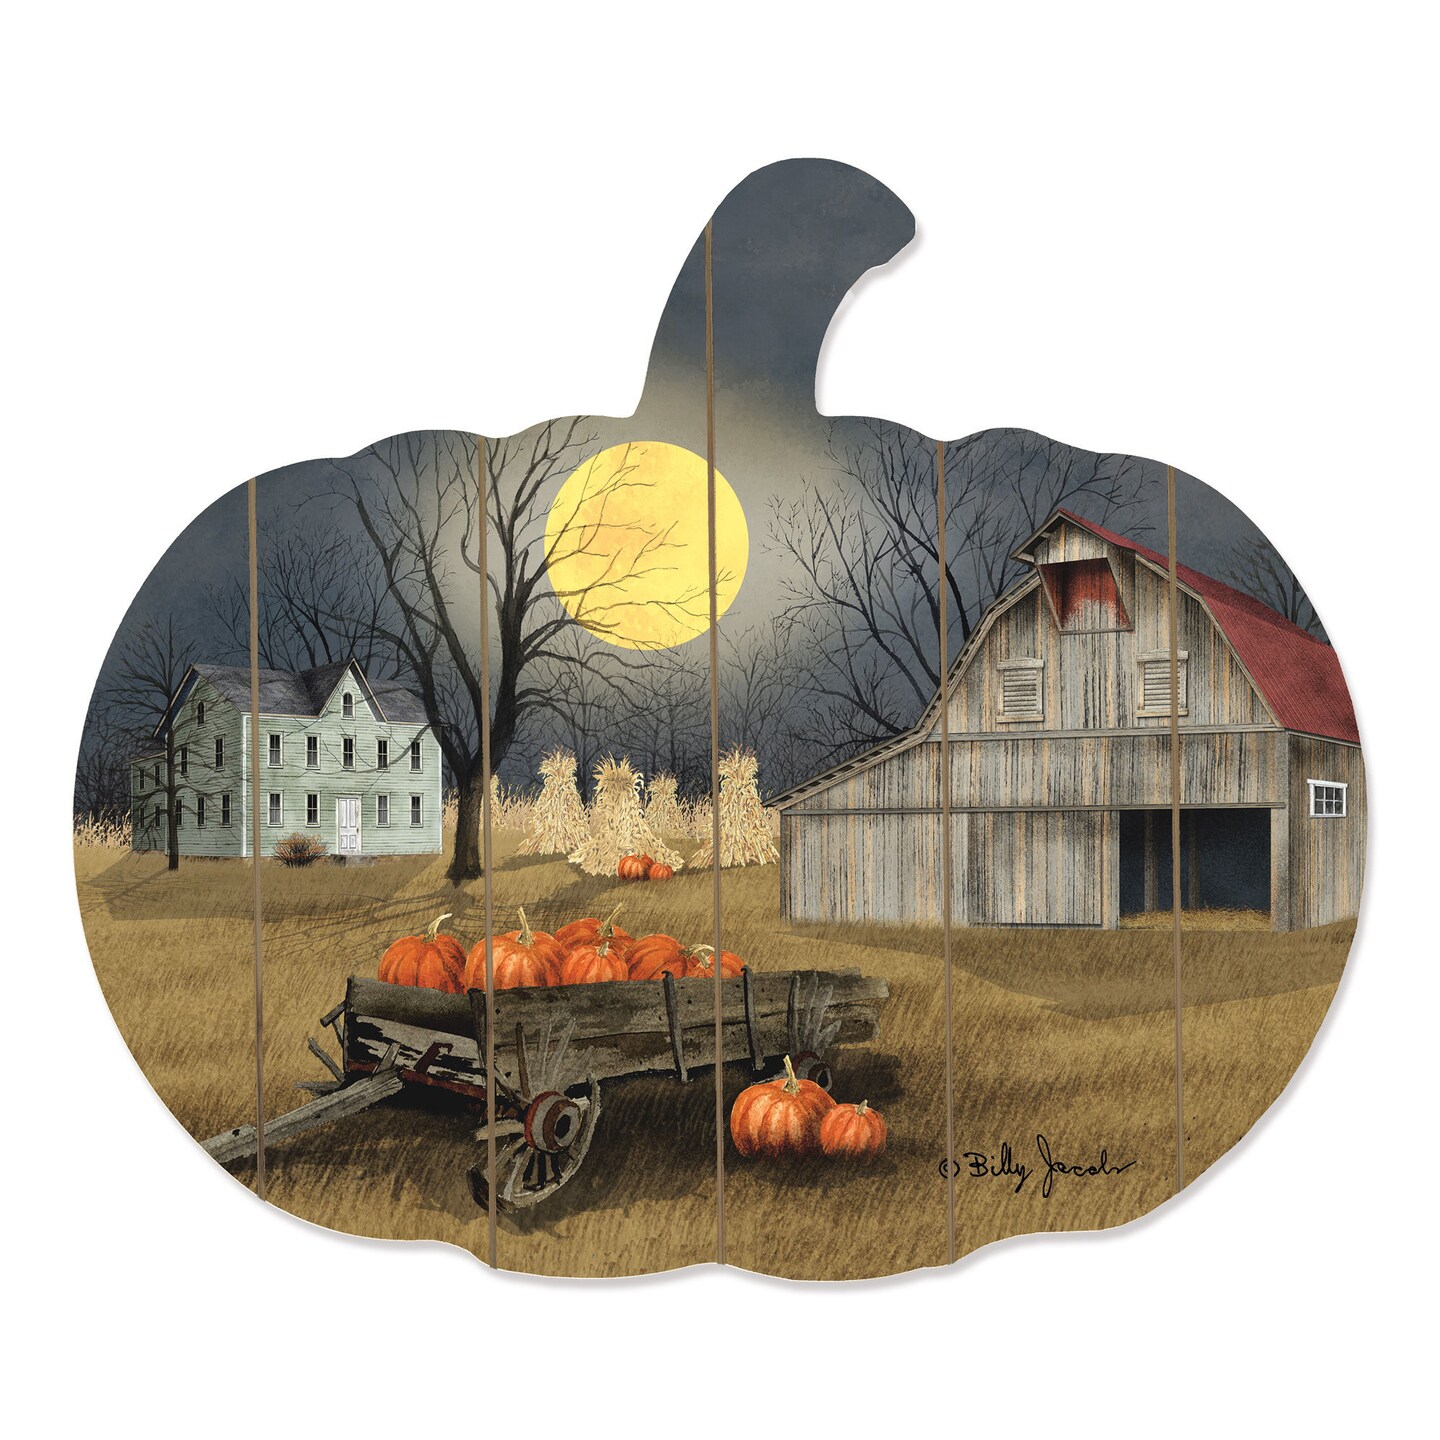 Harvest Moon - By Artisan Billy Jacobs Printed on Wooden Pumpkin Wall Art